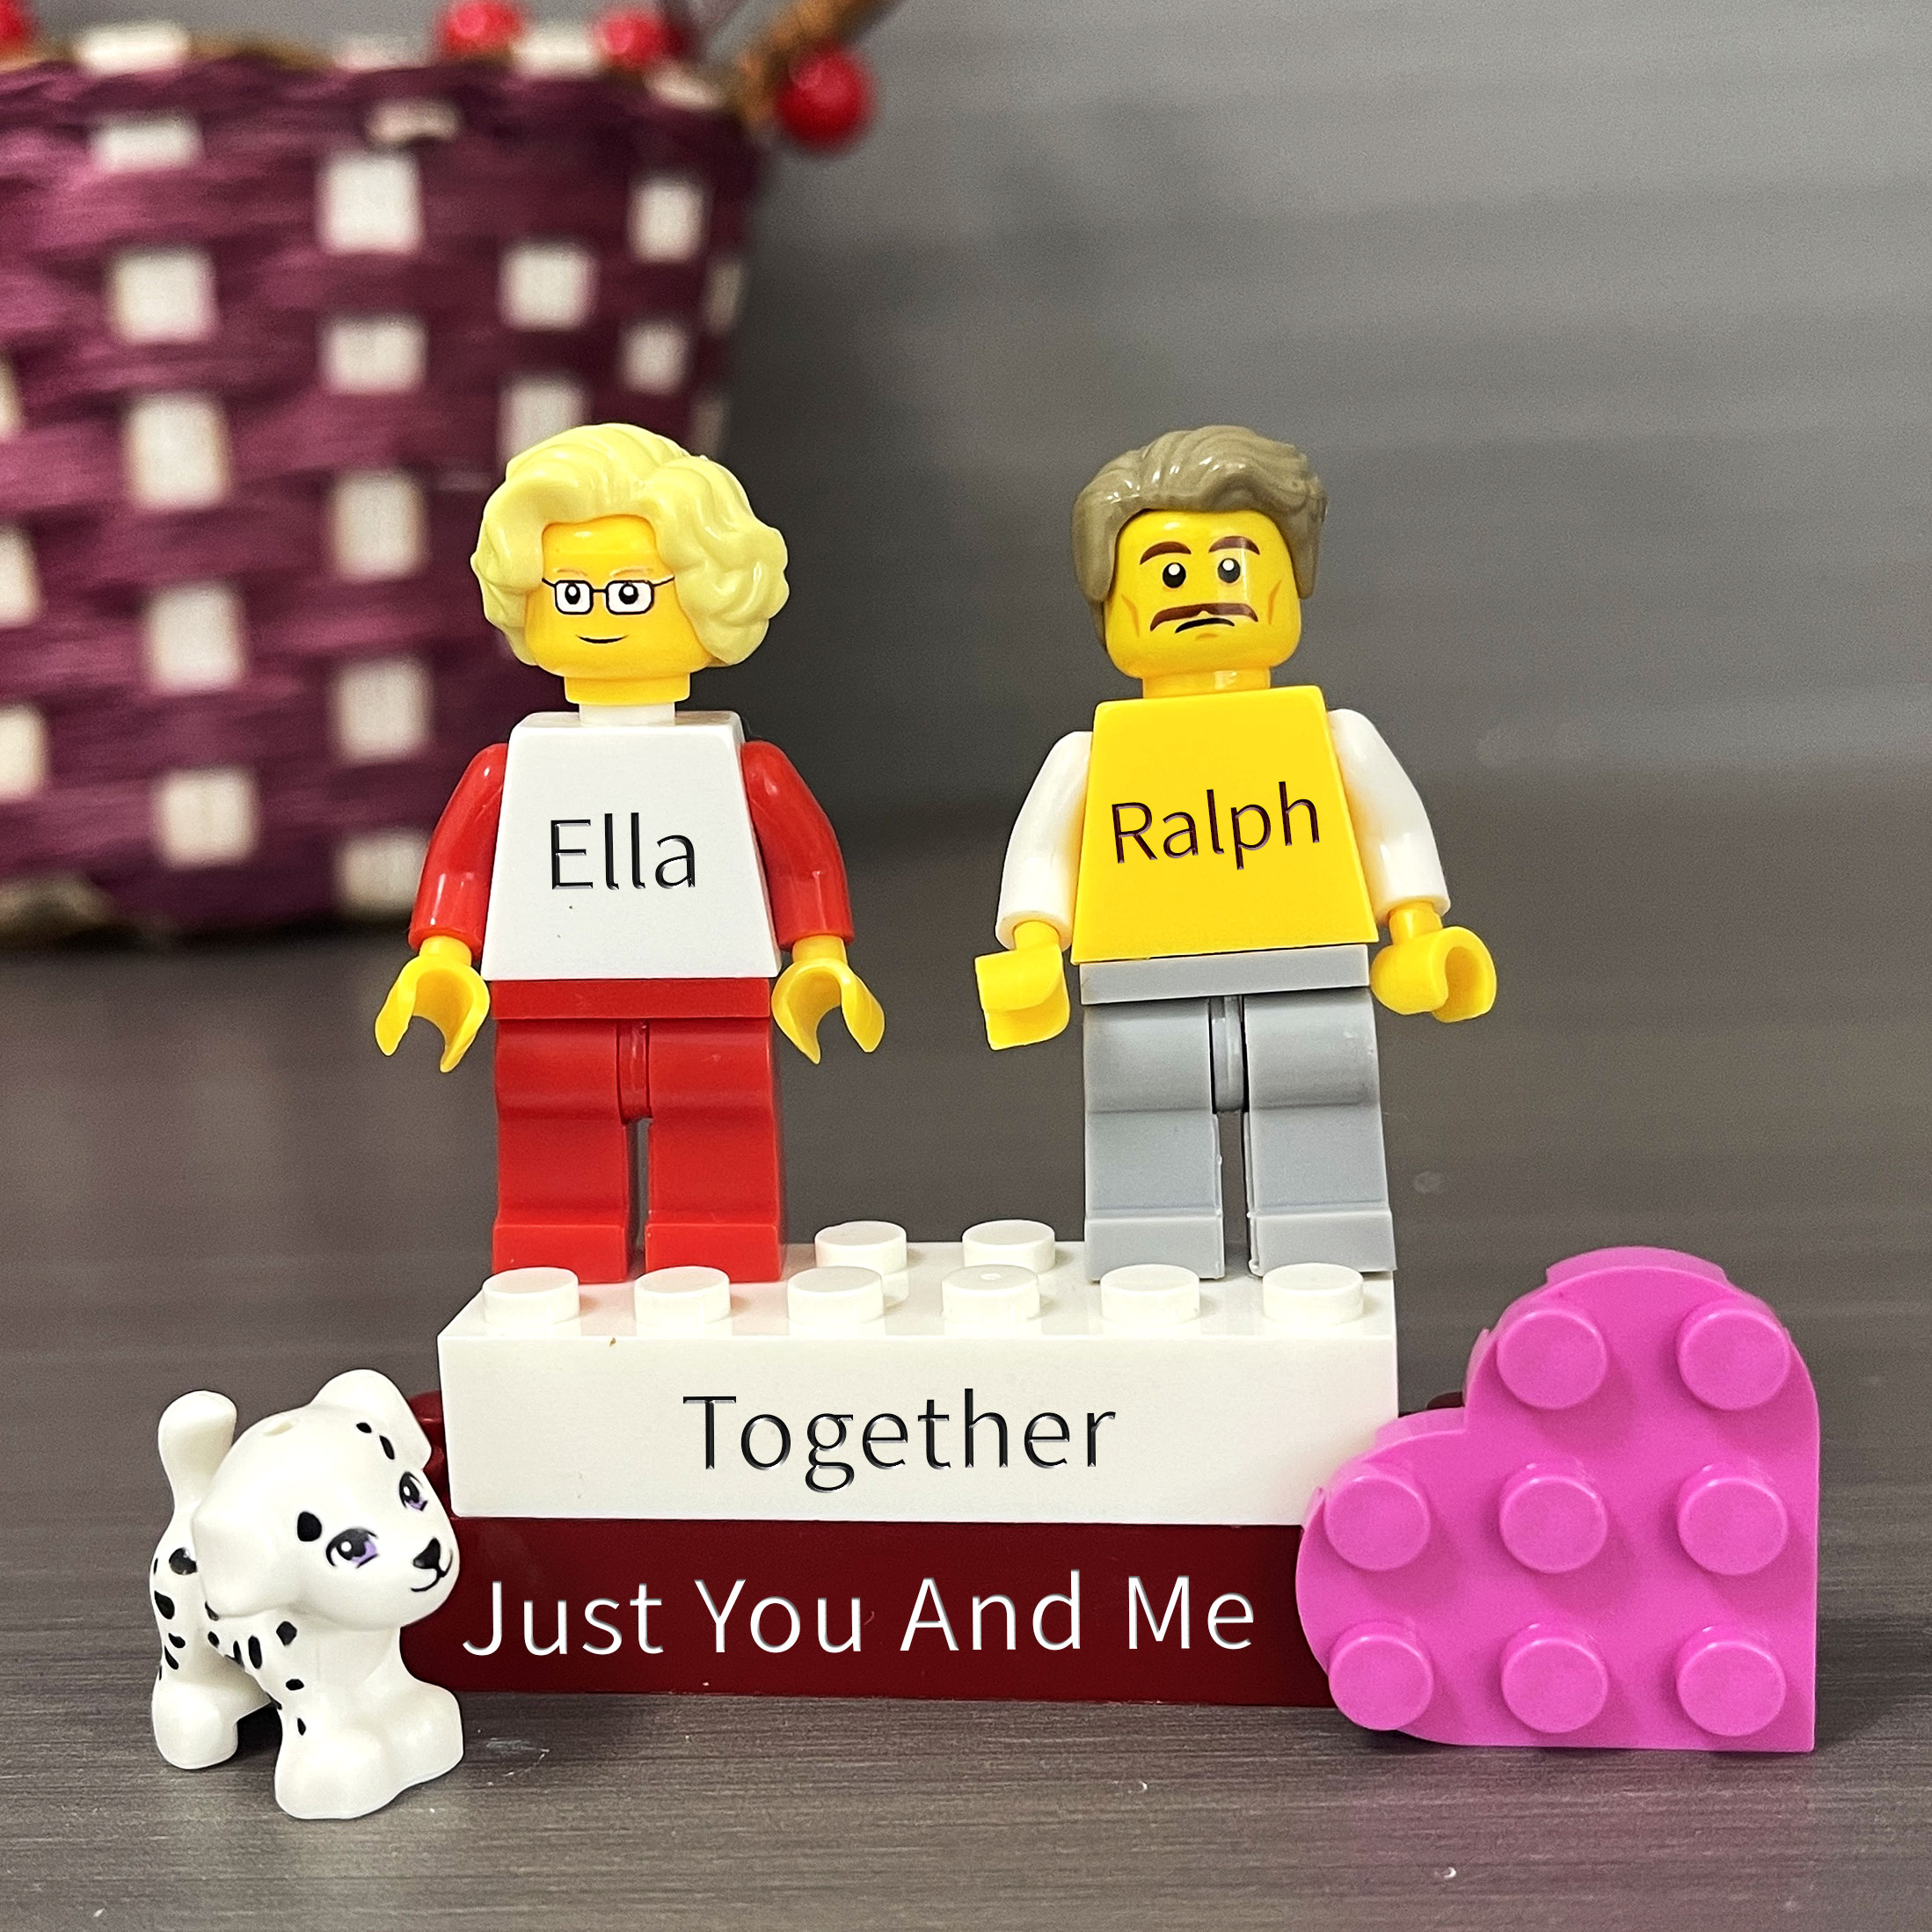 We Together Personalized Figures on Personalized Brick With Love/Pets For Happy Valentine's Day Merry Christmas